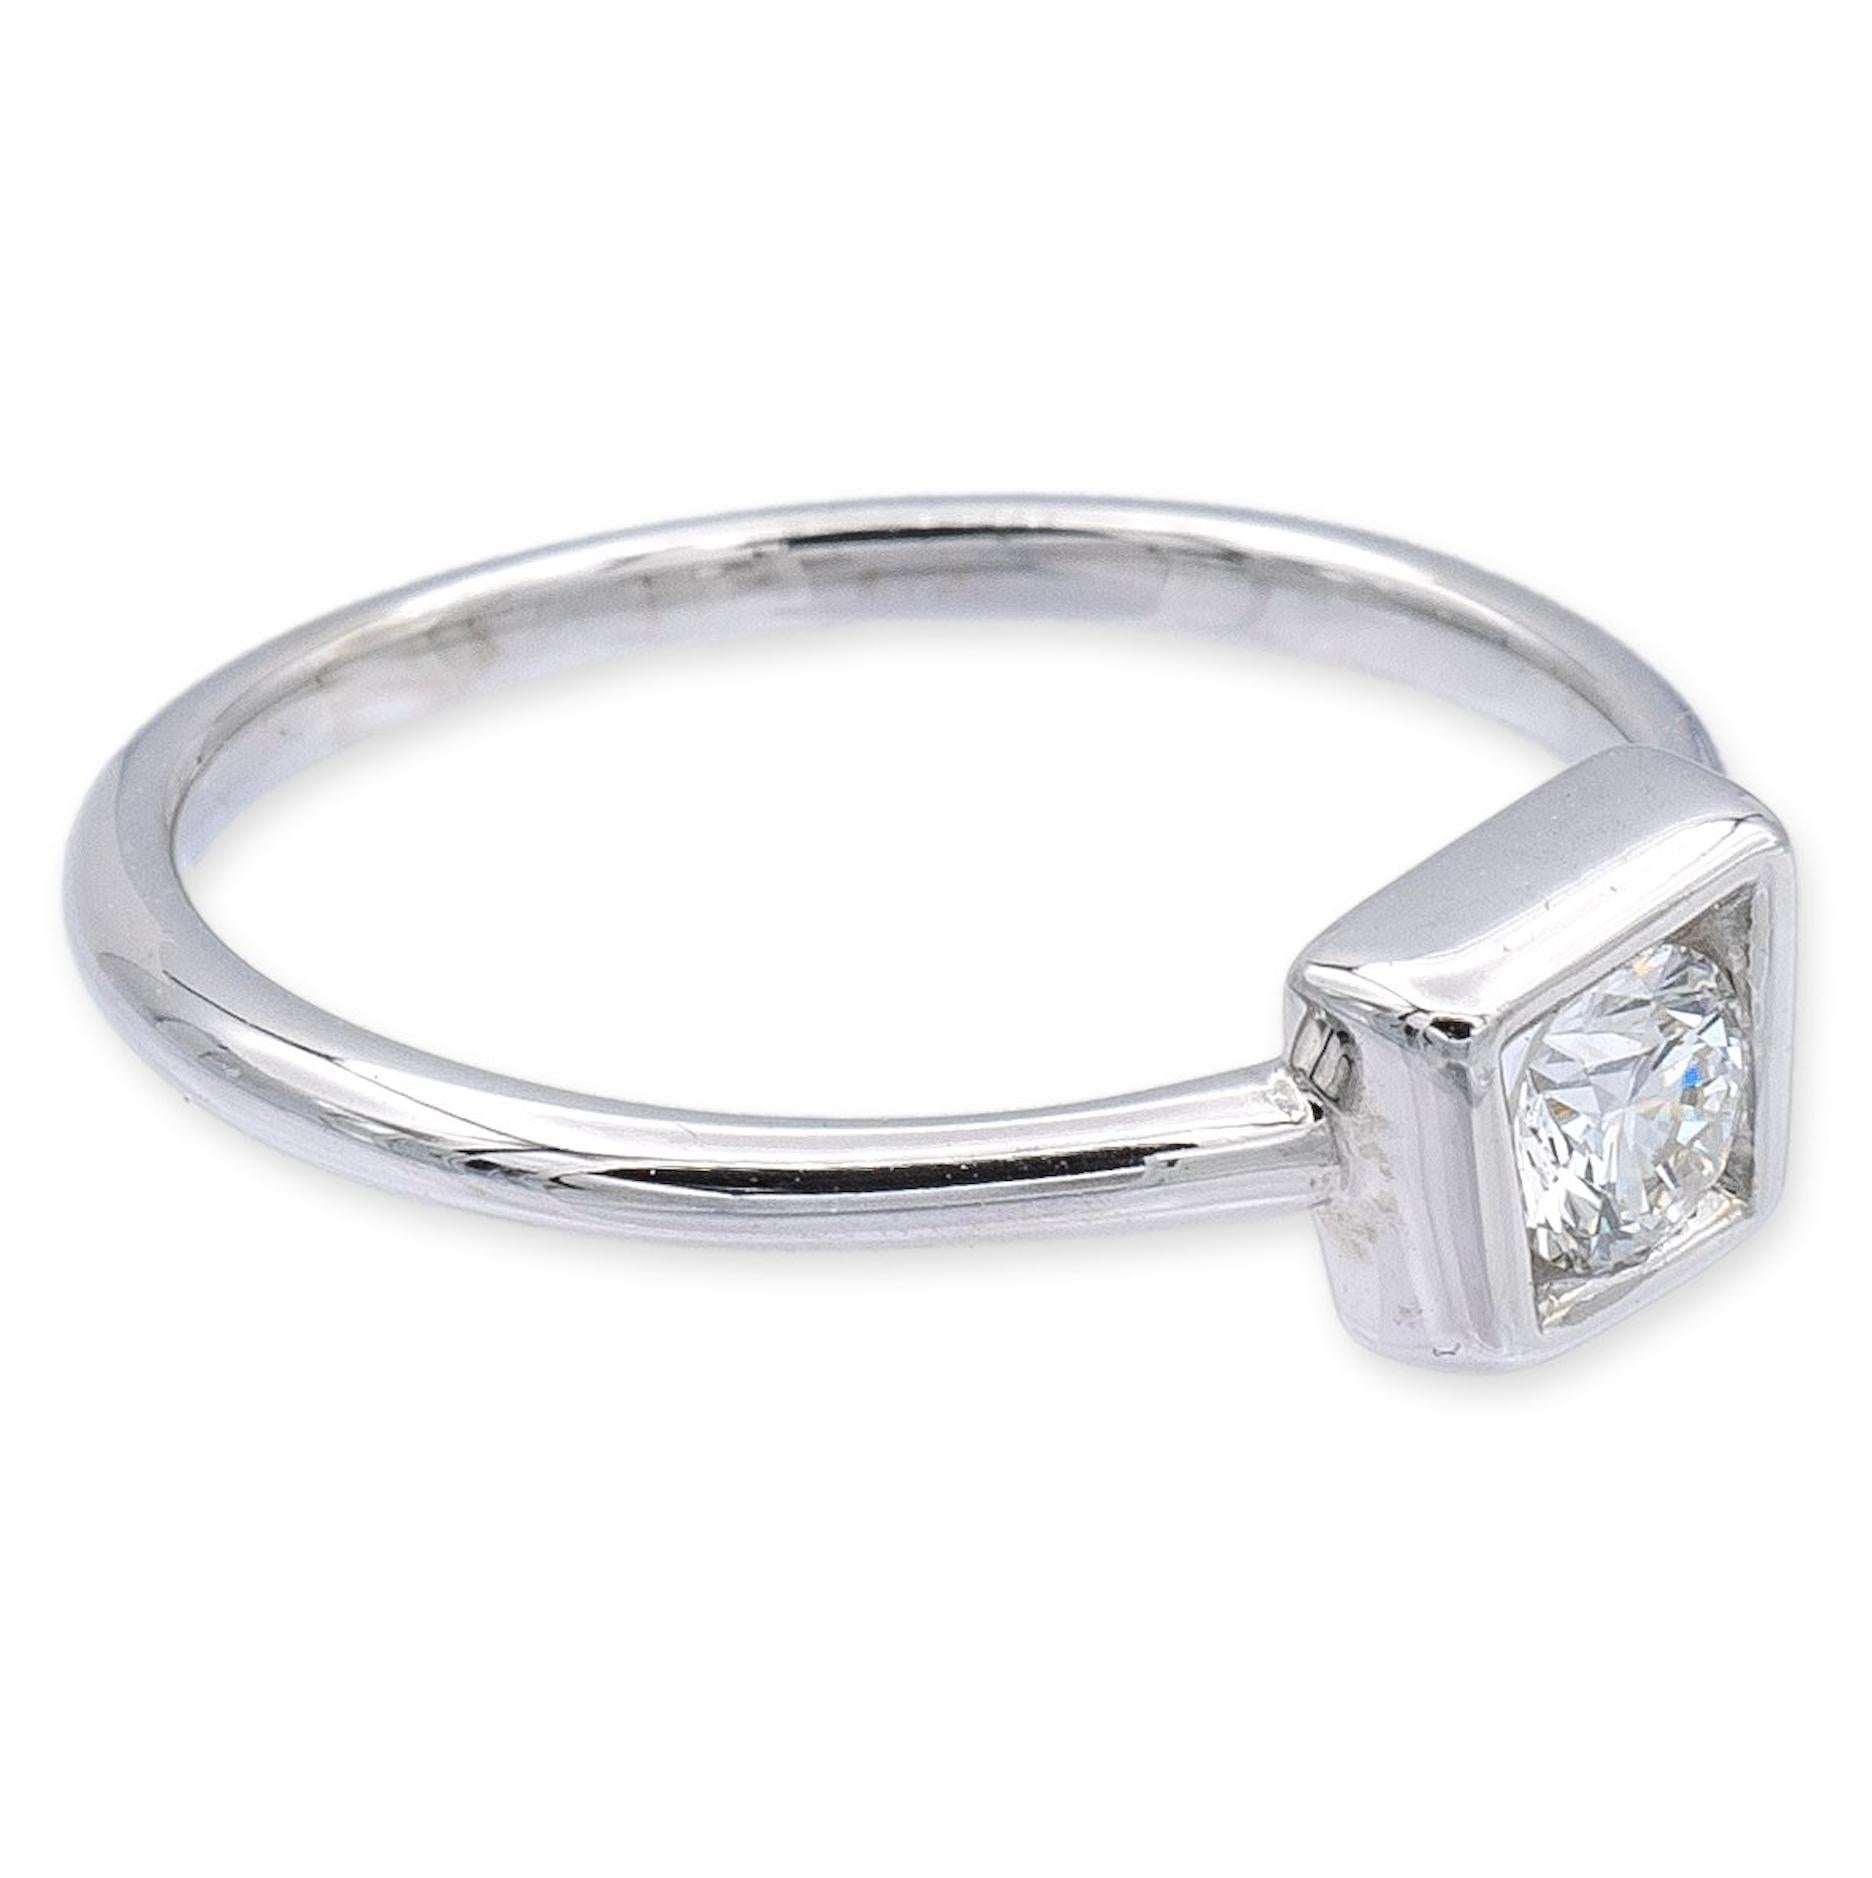 Tiffany & Co limited edition signature ring by Frank Gehry finely crafted in 18 karat white gold featuring a round brilliant cut 0.20 center E color VS1 clarity set inside a minimalist style square bezel. Square measures 5mm approximately. 
Please